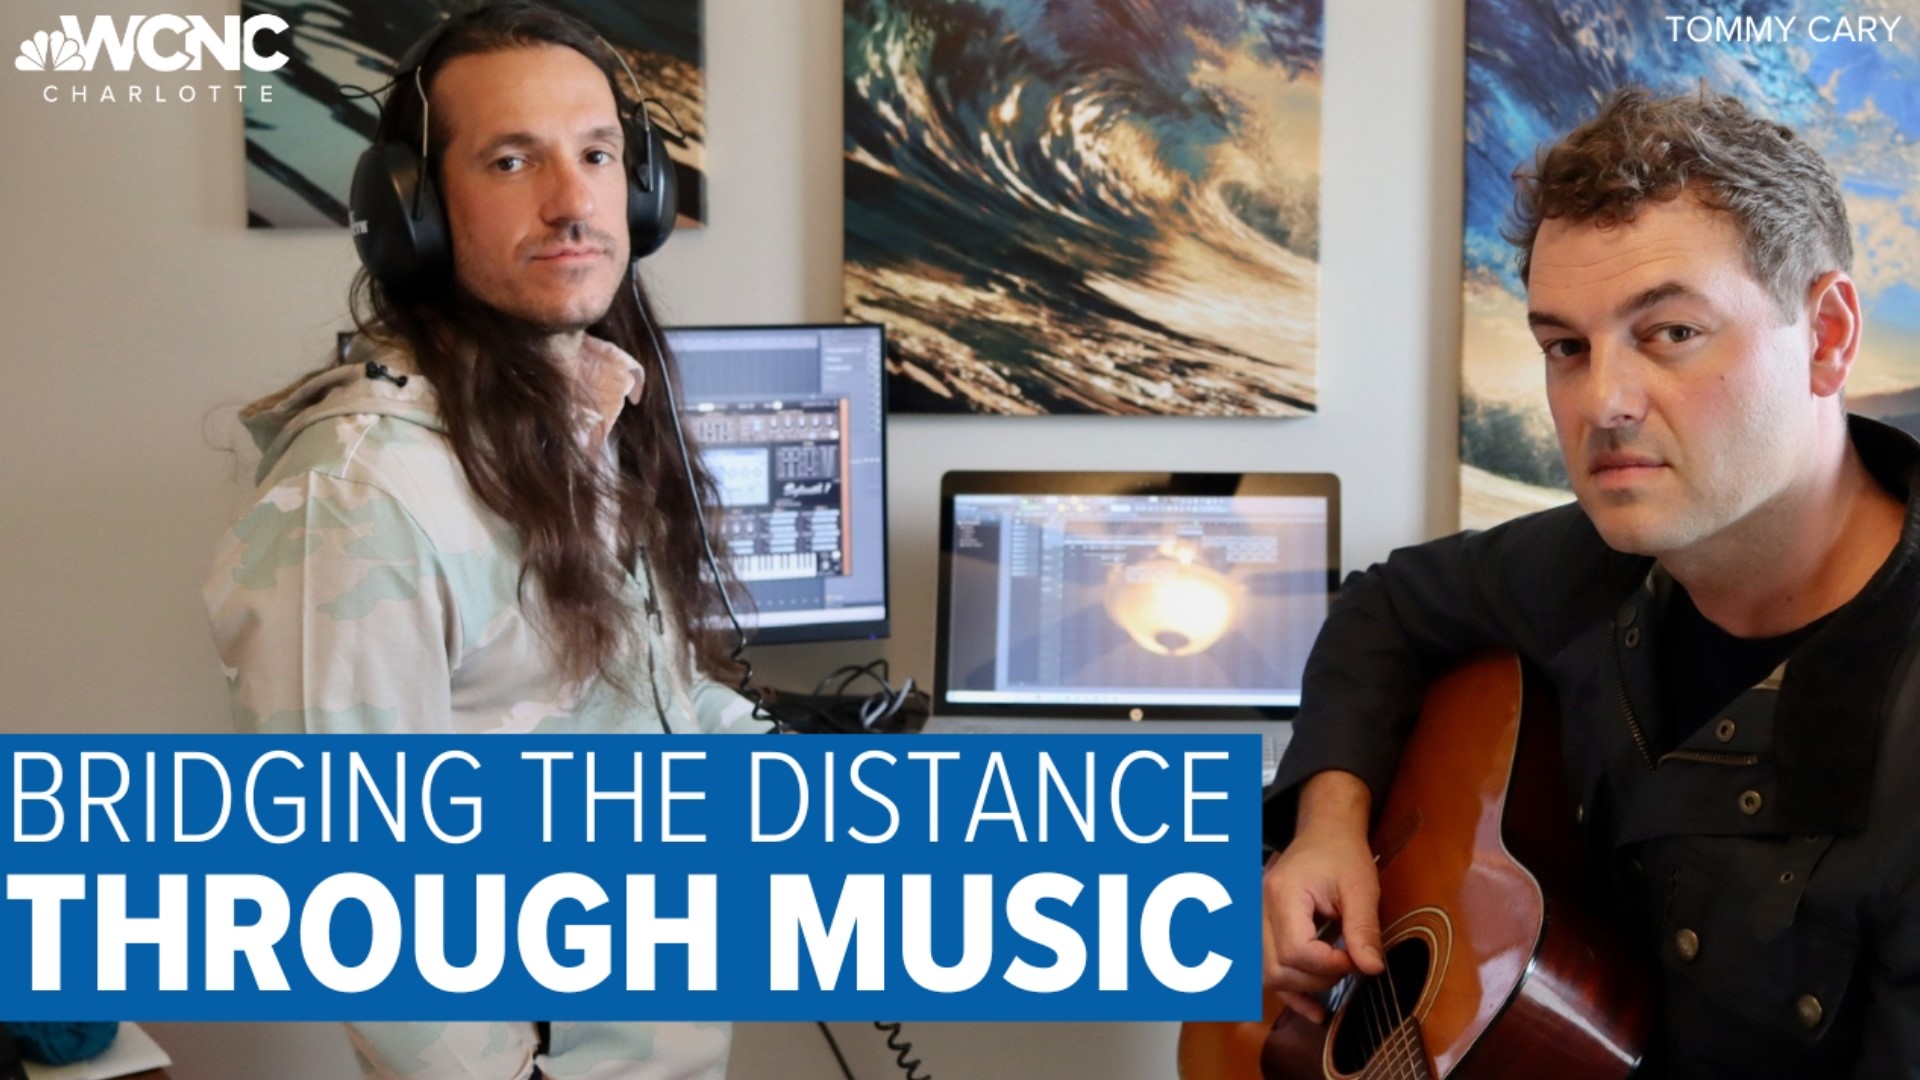 The brothers live in different cities and have different software, computers, and strengths. They say the act of making music together bridges the physical distance.